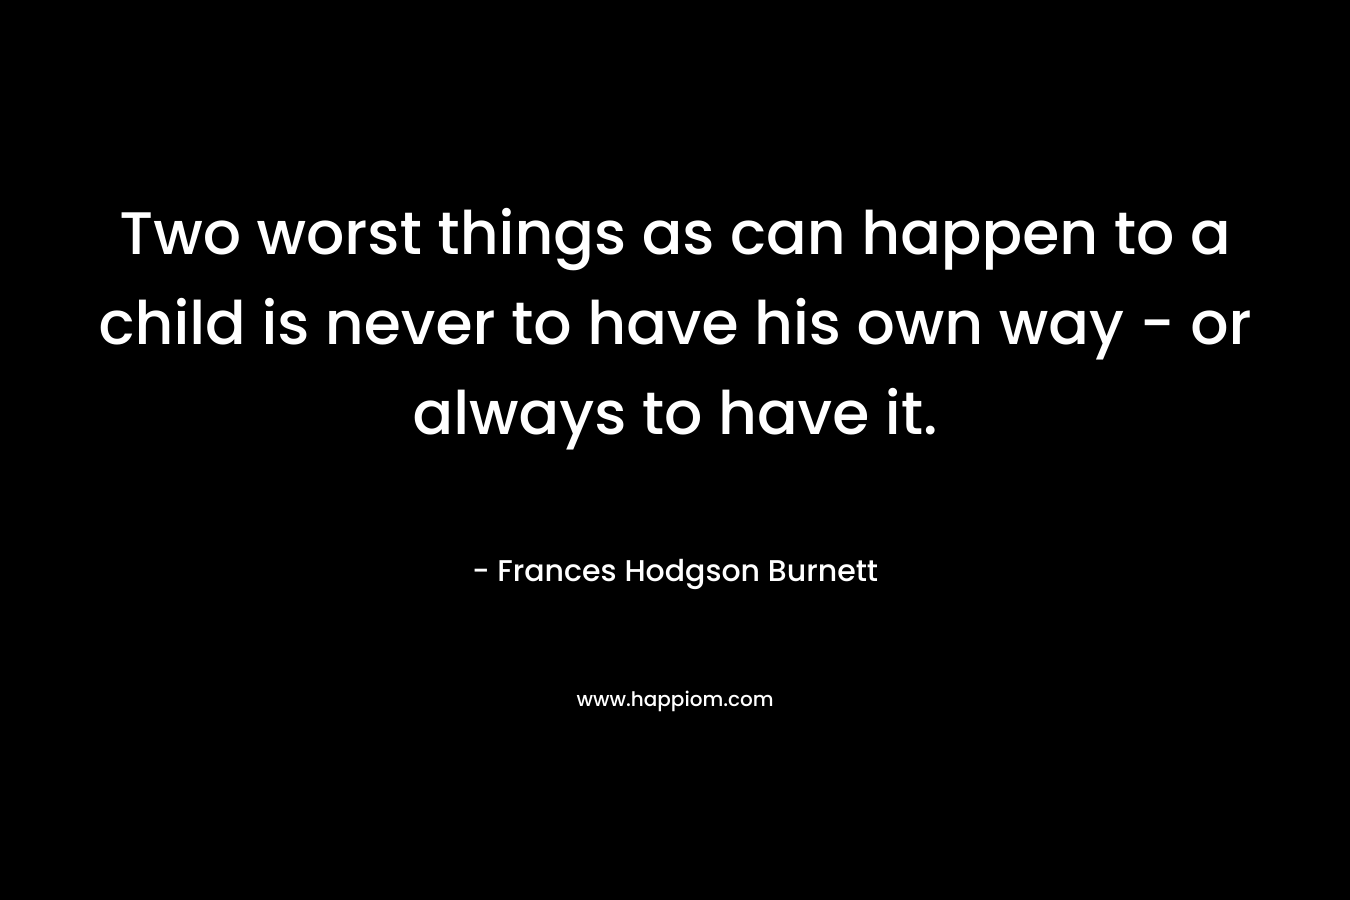 Two worst things as can happen to a child is never to have his own way – or always to have it. – Frances Hodgson Burnett